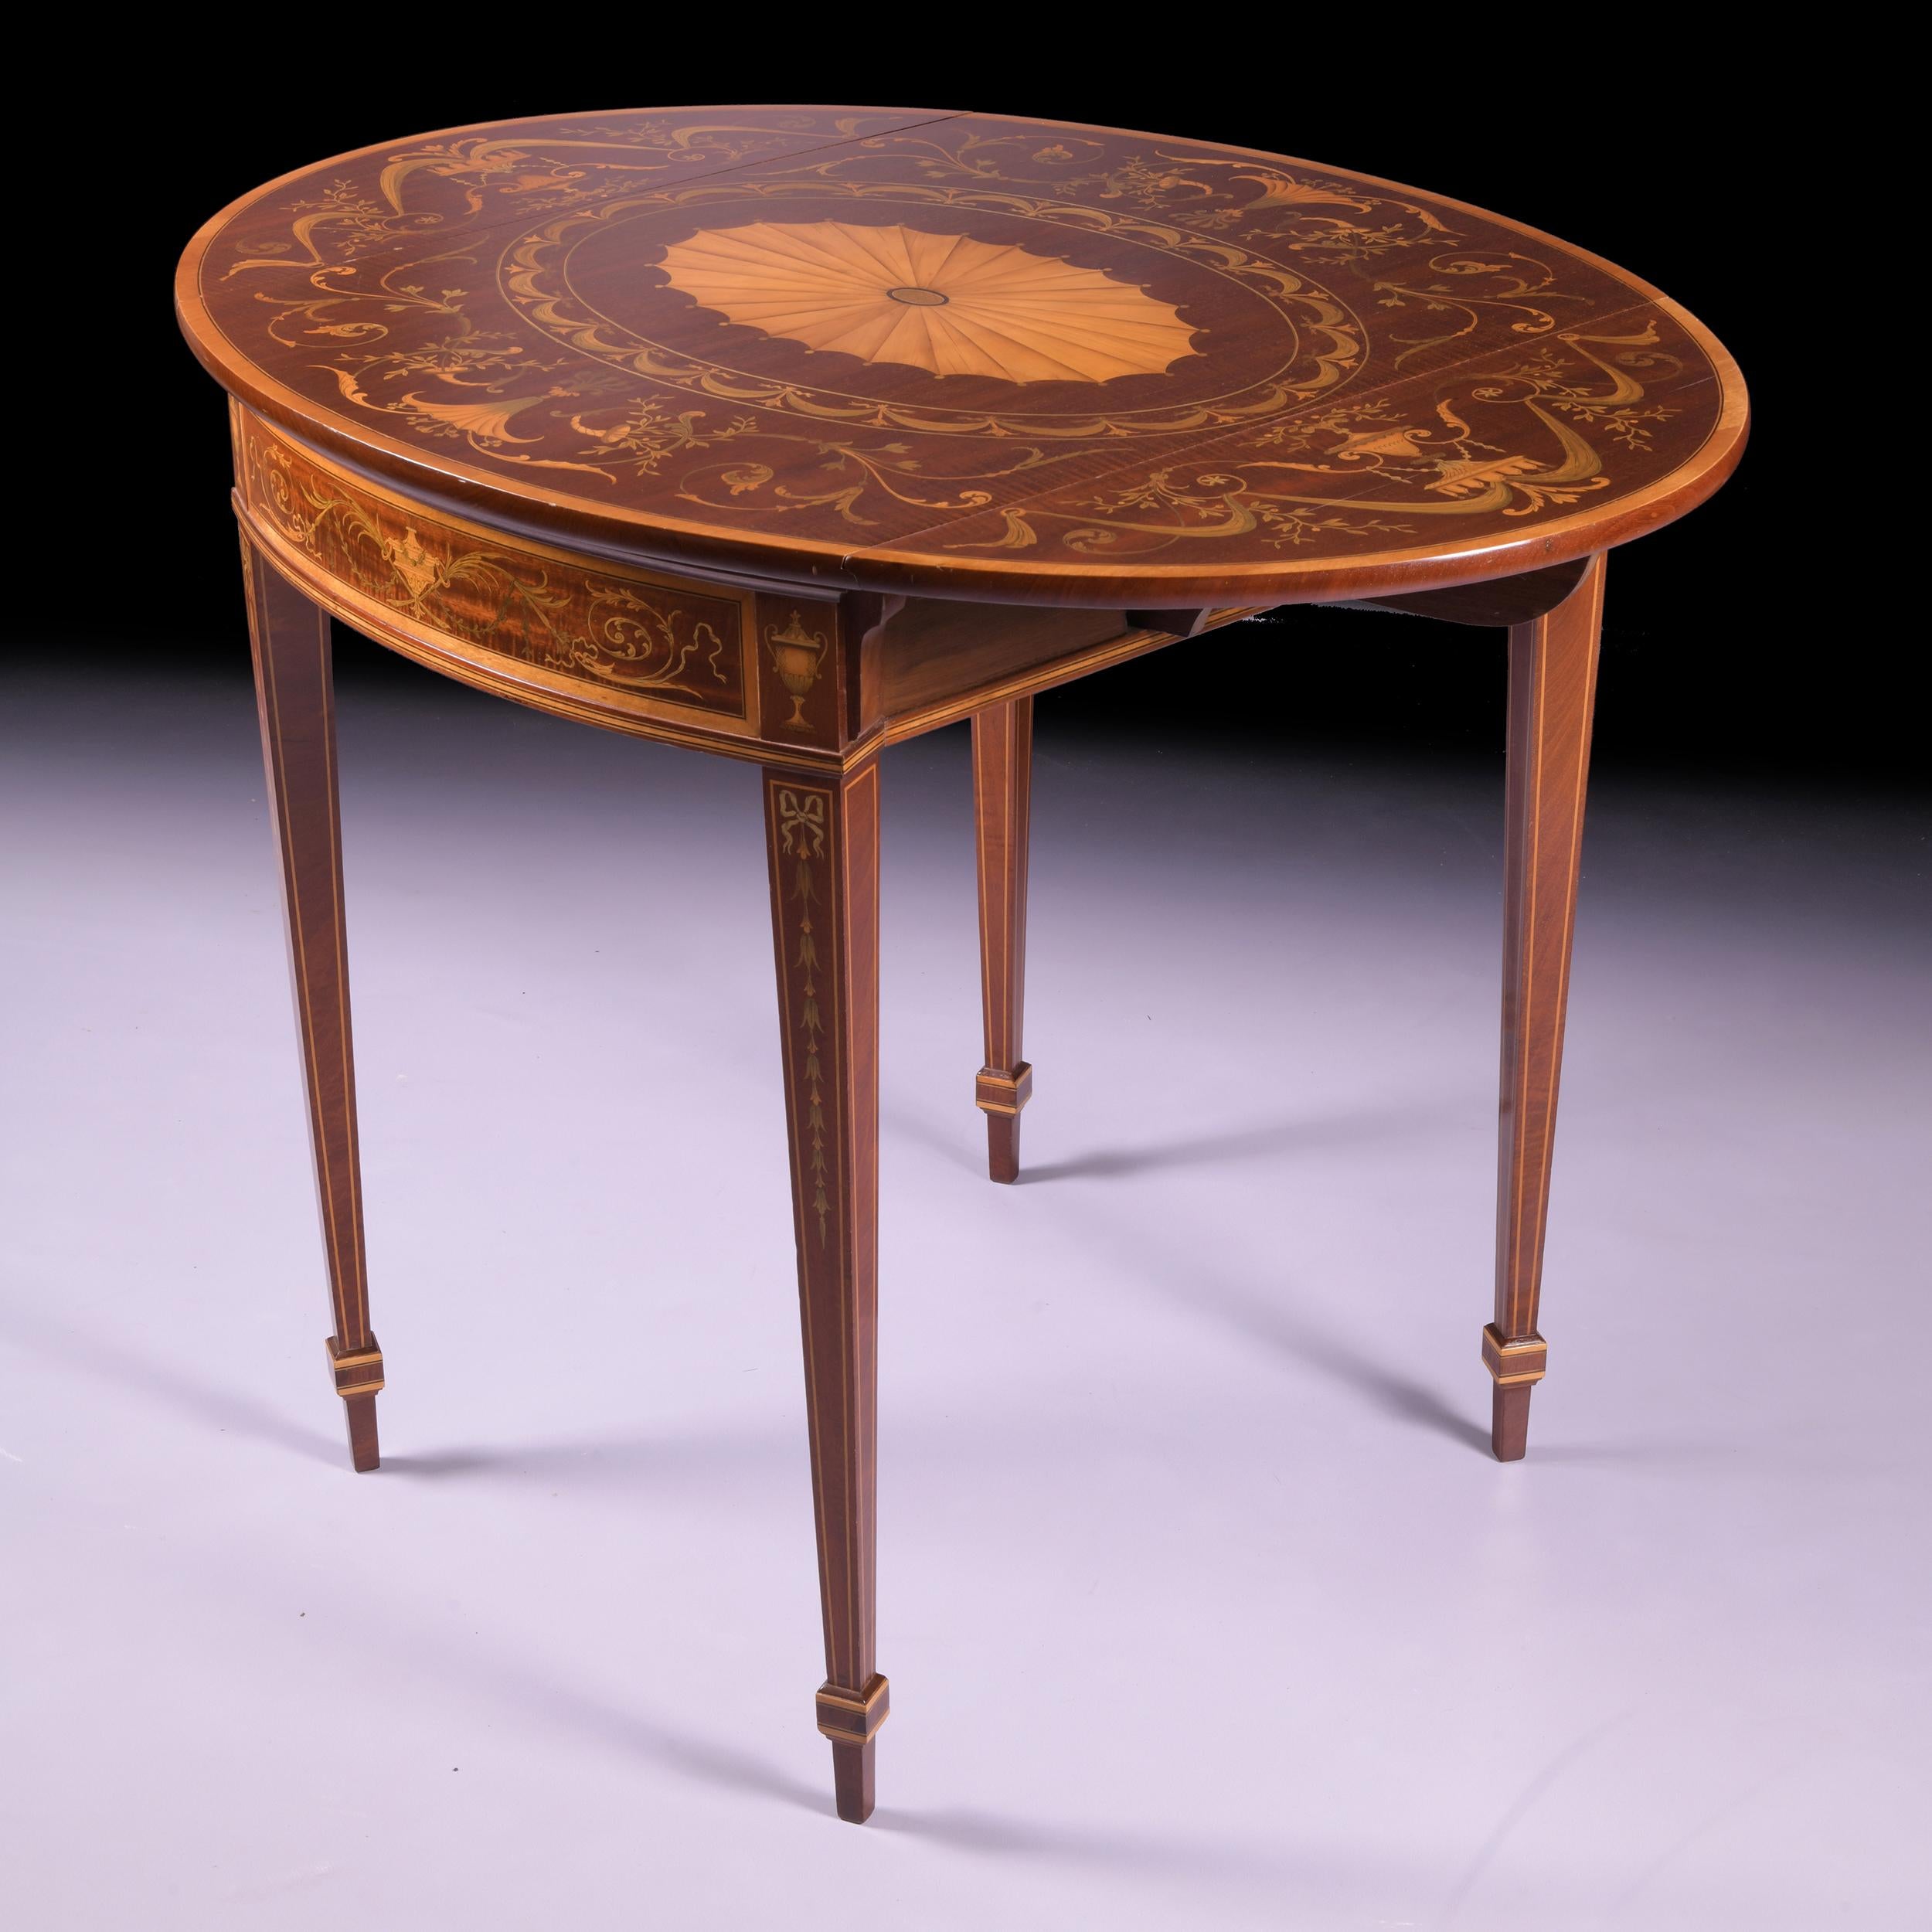 20th Century Late 19th Century English Edwardian Satinwood Pembroke Table By Edwards & Robert For Sale